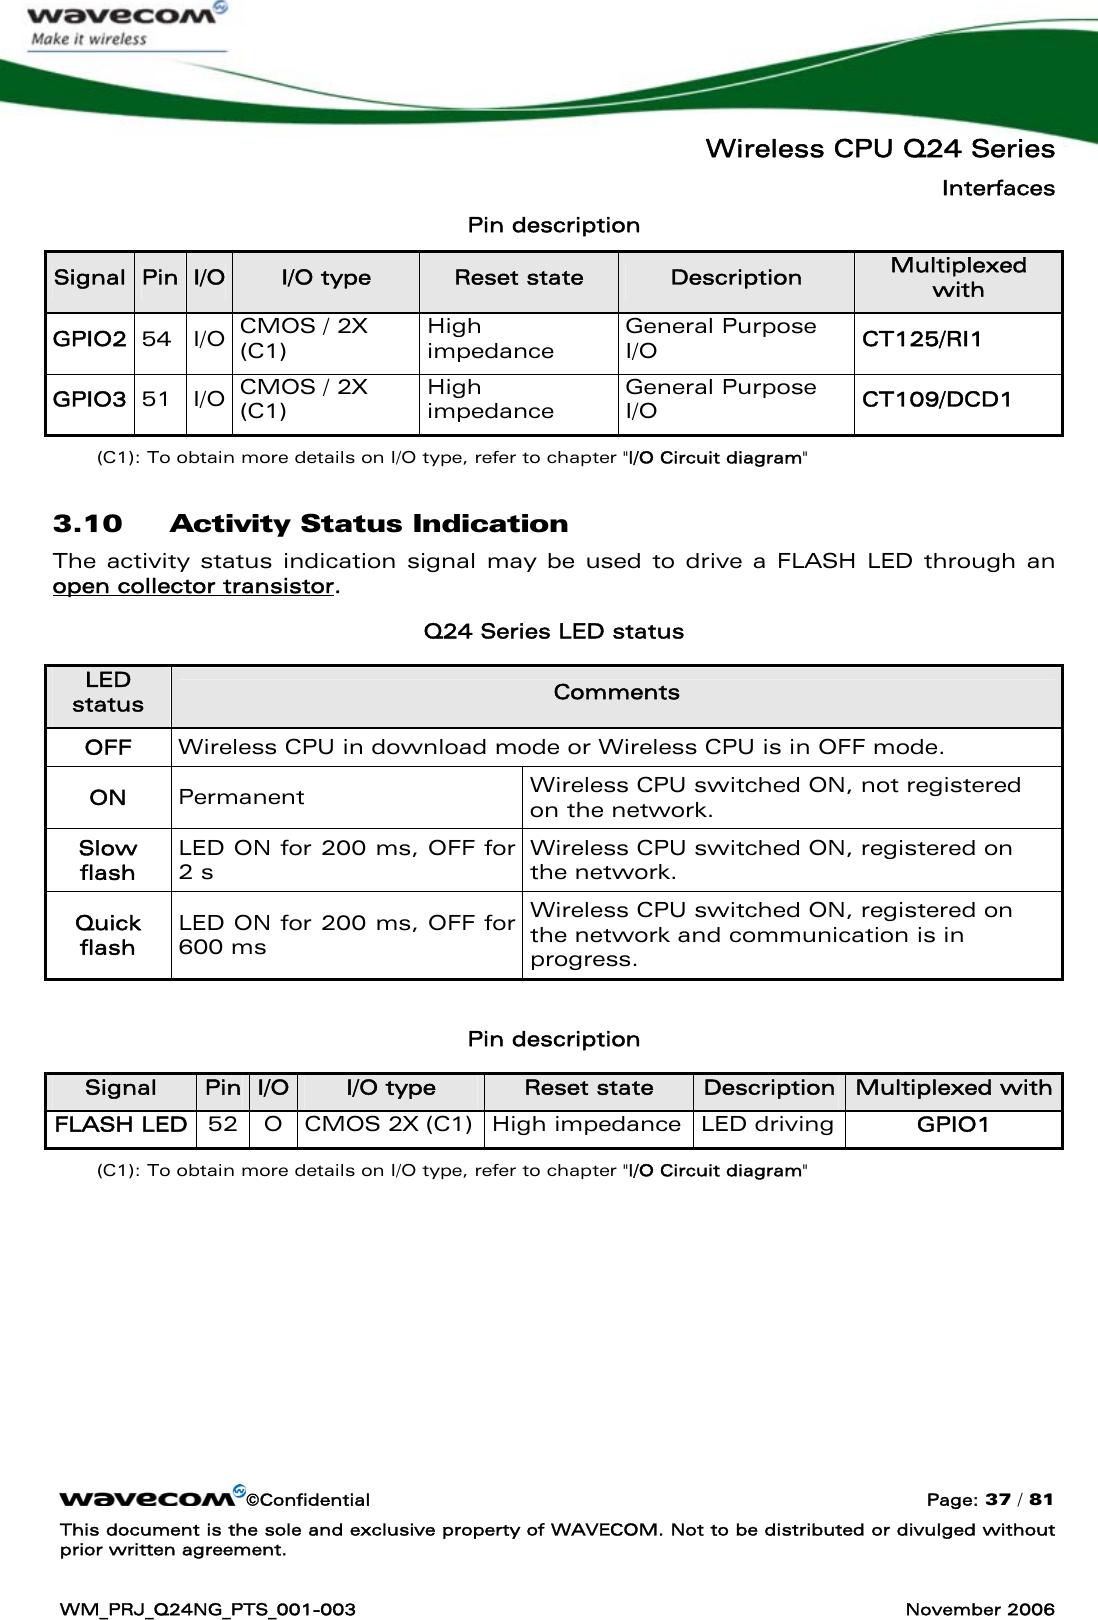   Wireless CPU Q24 Series Interfaces ©Confidential  Page: 37 / 81 This document is the sole and exclusive property of WAVECOM. Not to be distributed or divulged without prior written agreement.  WM_PRJ_Q24NG_PTS_001-003  November 2006  Pin description Signal  Pin  I/O  I/O type  Reset state  Description  Multiplexed with GPIO2  54 I/O CMOS / 2X (C1) High impedance General Purpose I/O  CT125/RI1 GPIO3  51 I/O CMOS / 2X (C1) High impedance General Purpose I/O  CT109/DCD1 (C1): To obtain more details on I/O type, refer to chapter &quot;I/O Circuit diagram&quot; 3.10 Activity Status Indication The activity status indication signal may be used to drive a FLASH LED through an open collector transistor. Q24 Series LED status  LED status  Comments OFF  Wireless CPU in download mode or Wireless CPU is in OFF mode. ON  Permanent  Wireless CPU switched ON, not registered on the network. Slow flash LED ON for 200 ms, OFF for 2 s Wireless CPU switched ON, registered on the network. Quick flash LED ON for 200 ms, OFF for 600 ms Wireless CPU switched ON, registered on the network and communication is in progress.  Pin description Signal  Pin  I/O  I/O type  Reset state  Description  Multiplexed with FLASH LED  52  O  CMOS 2X (C1) High impedance LED driving  GPIO1 (C1): To obtain more details on I/O type, refer to chapter &quot;I/O Circuit diagram&quot; 